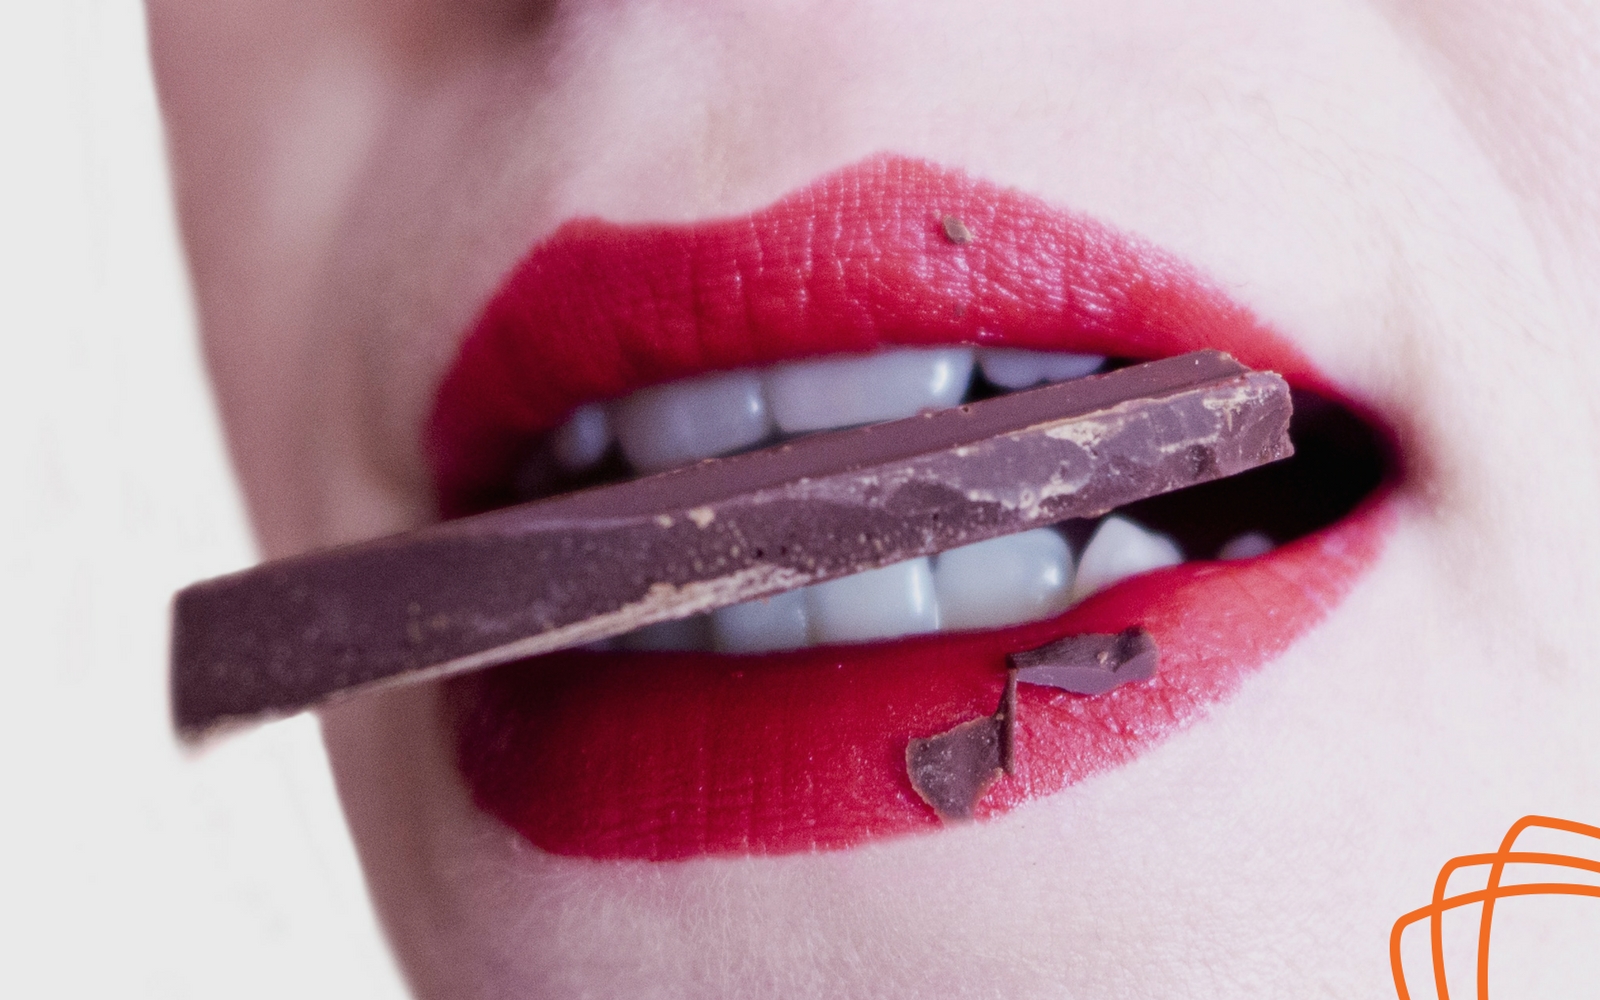 Eating Chocolate is good for you